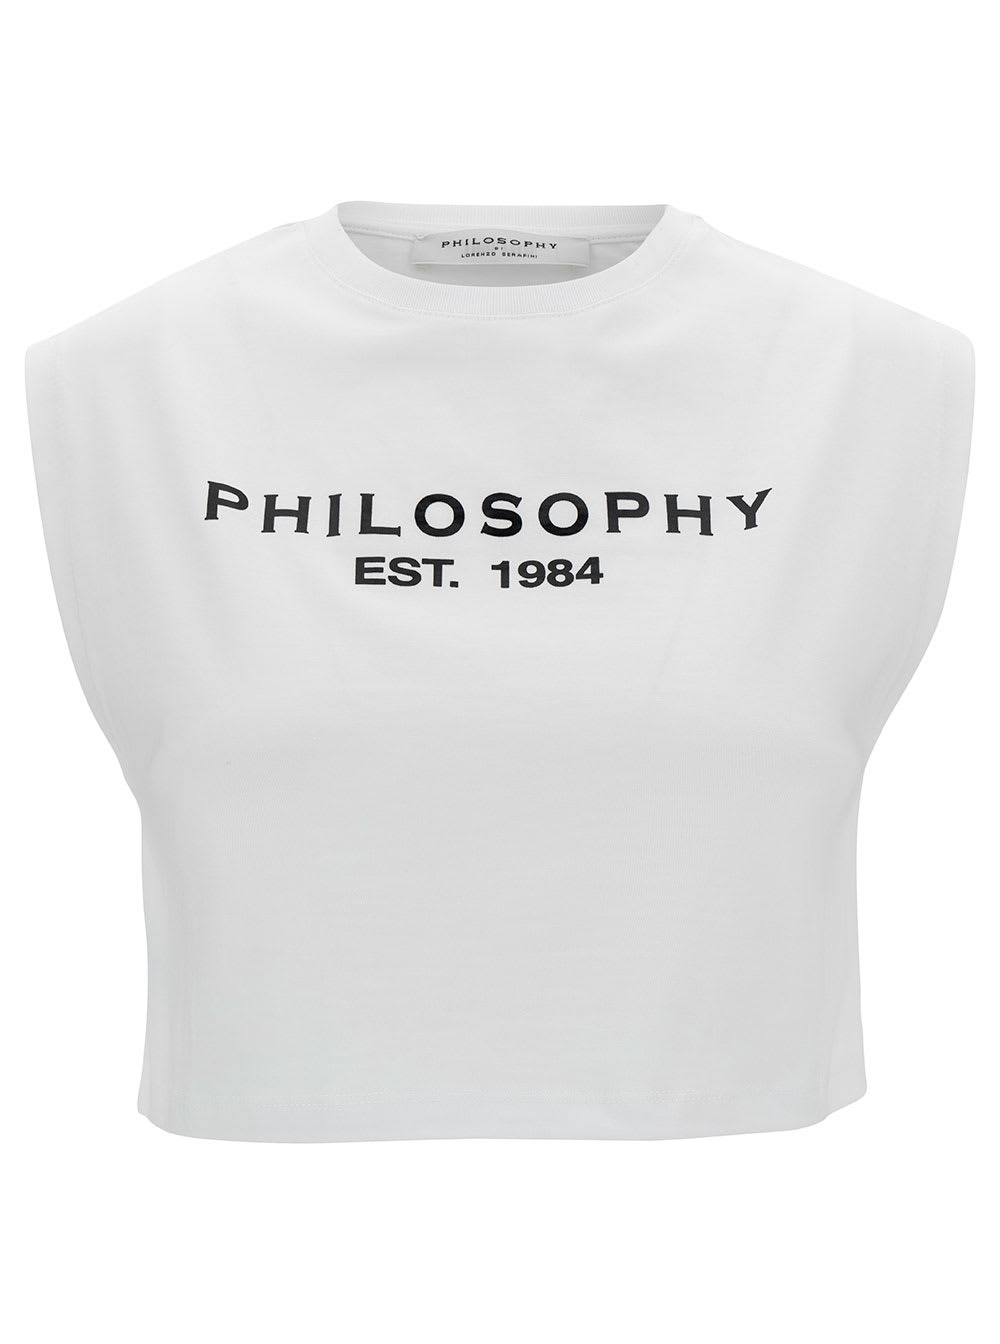 PHILOSOPHY DI LORENZO SERAFINI WHITE CROP T-SHIRT WITH FRONT AND REAR LOGO PRINT IN COTTON WOMAN